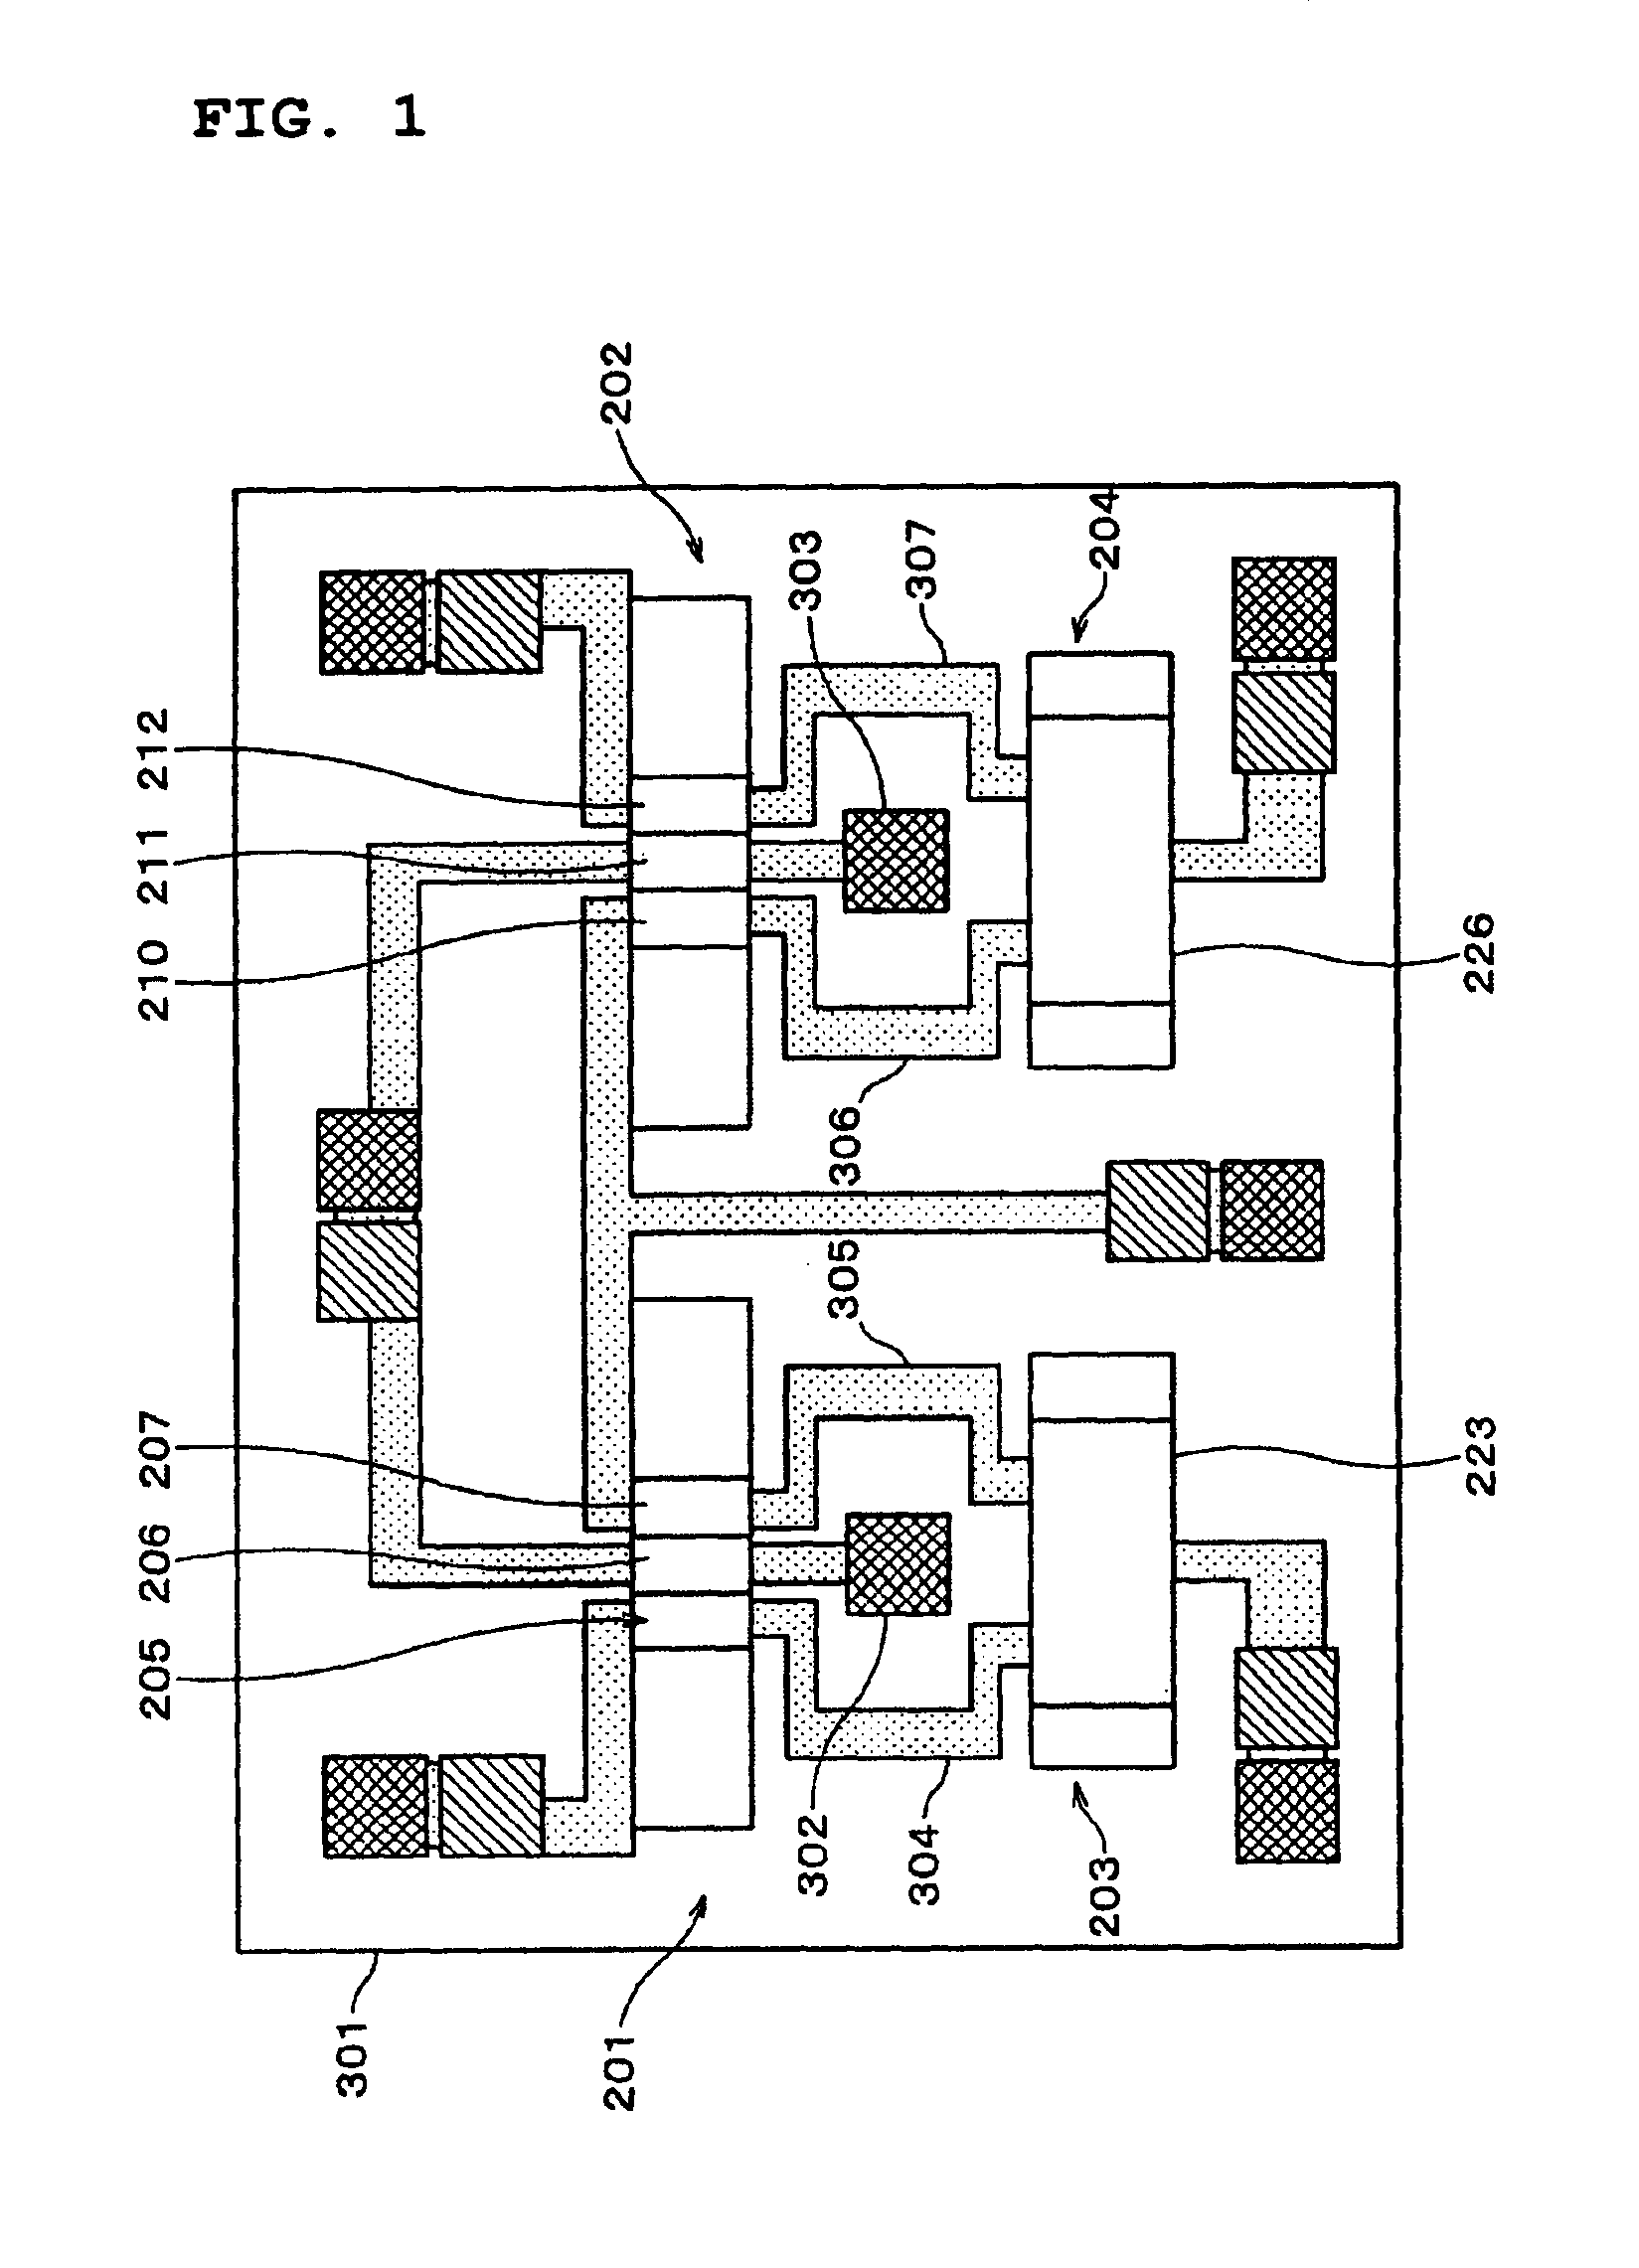 Surface acoustic wave apparatus and communication apparatus using the same